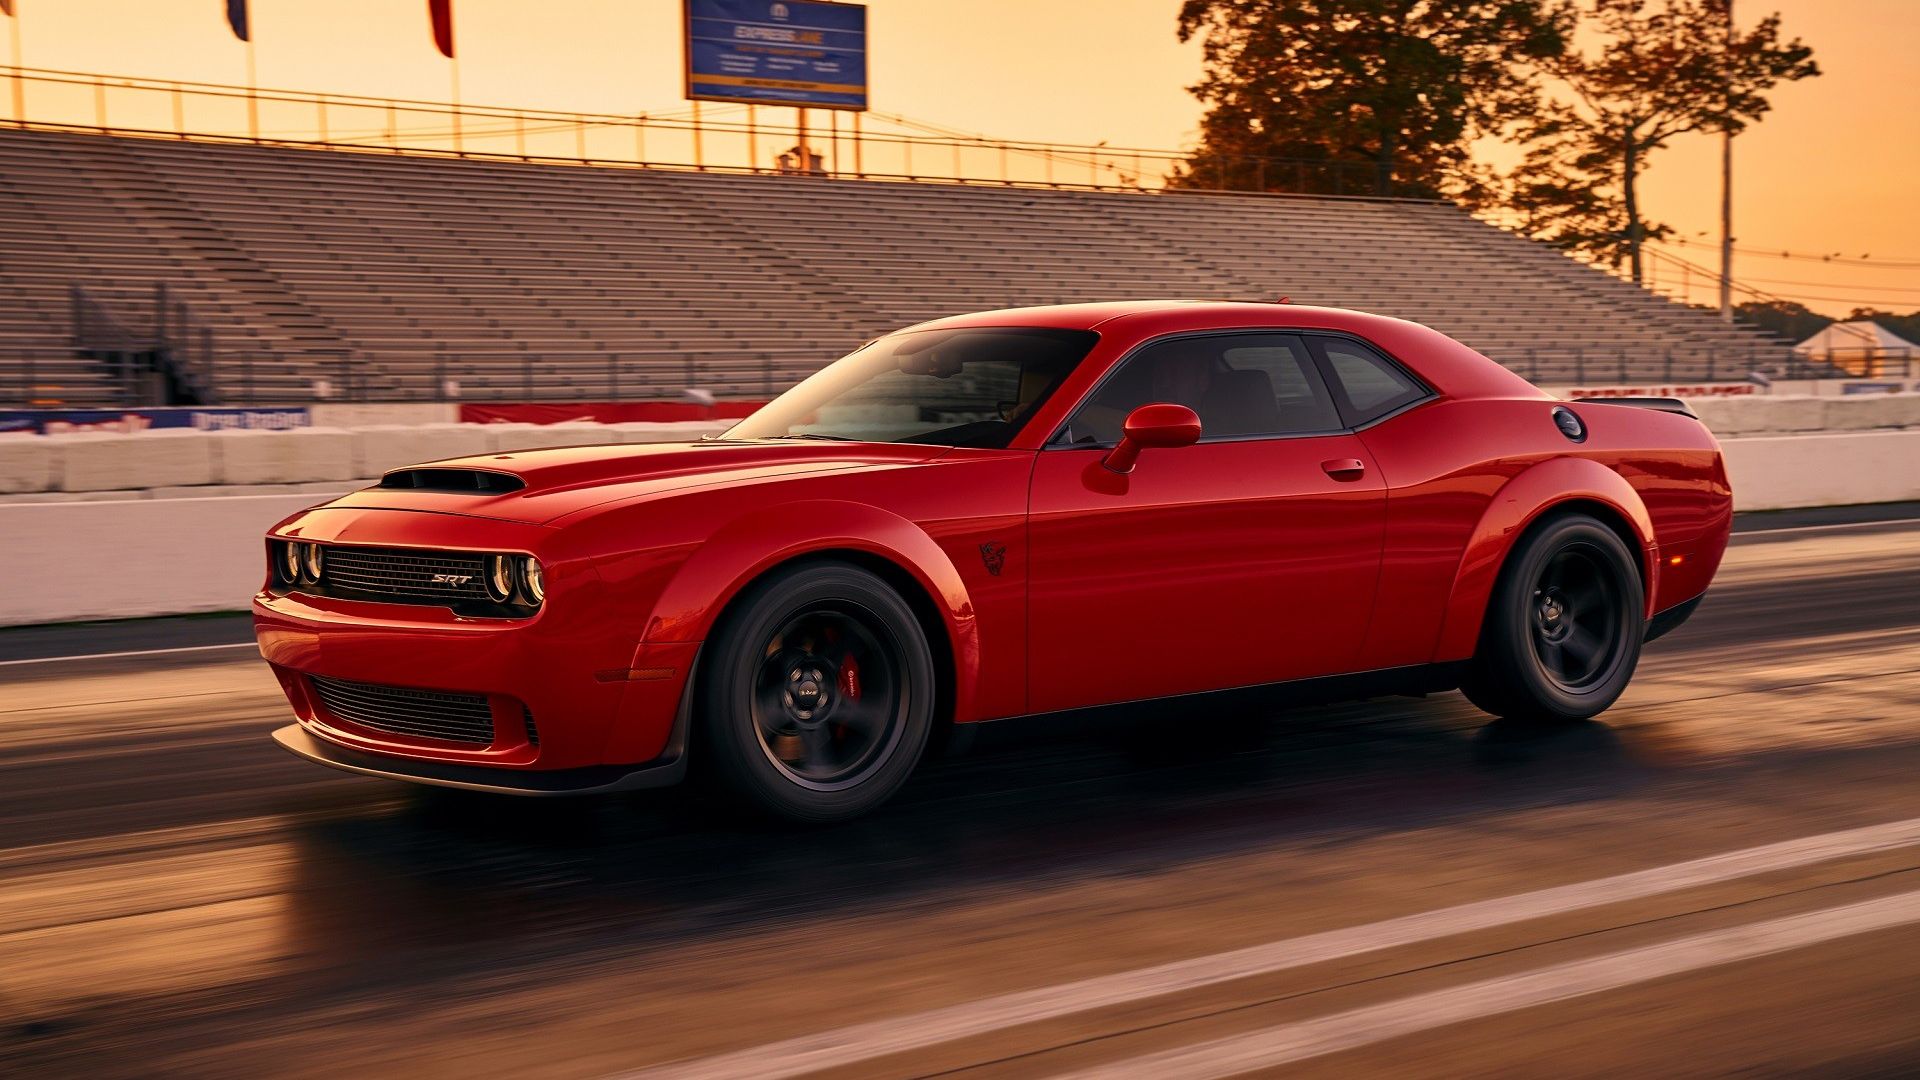 Wallpaper Dodge Challenger, amazing muscle car on road